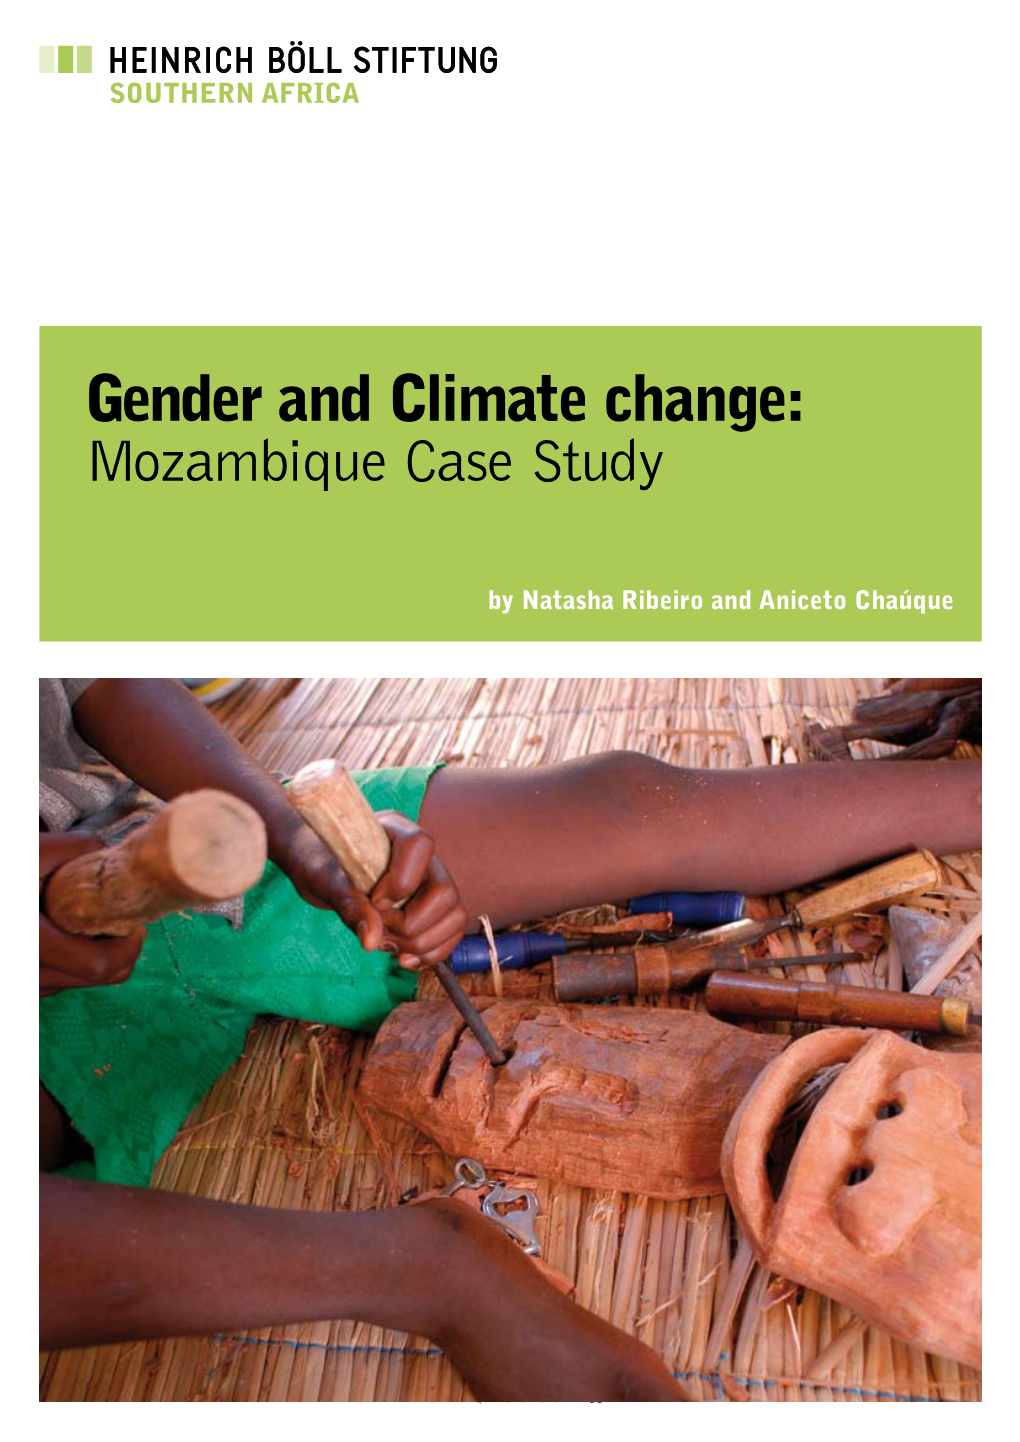 Gender and Climate Change: Mozambique Case Study